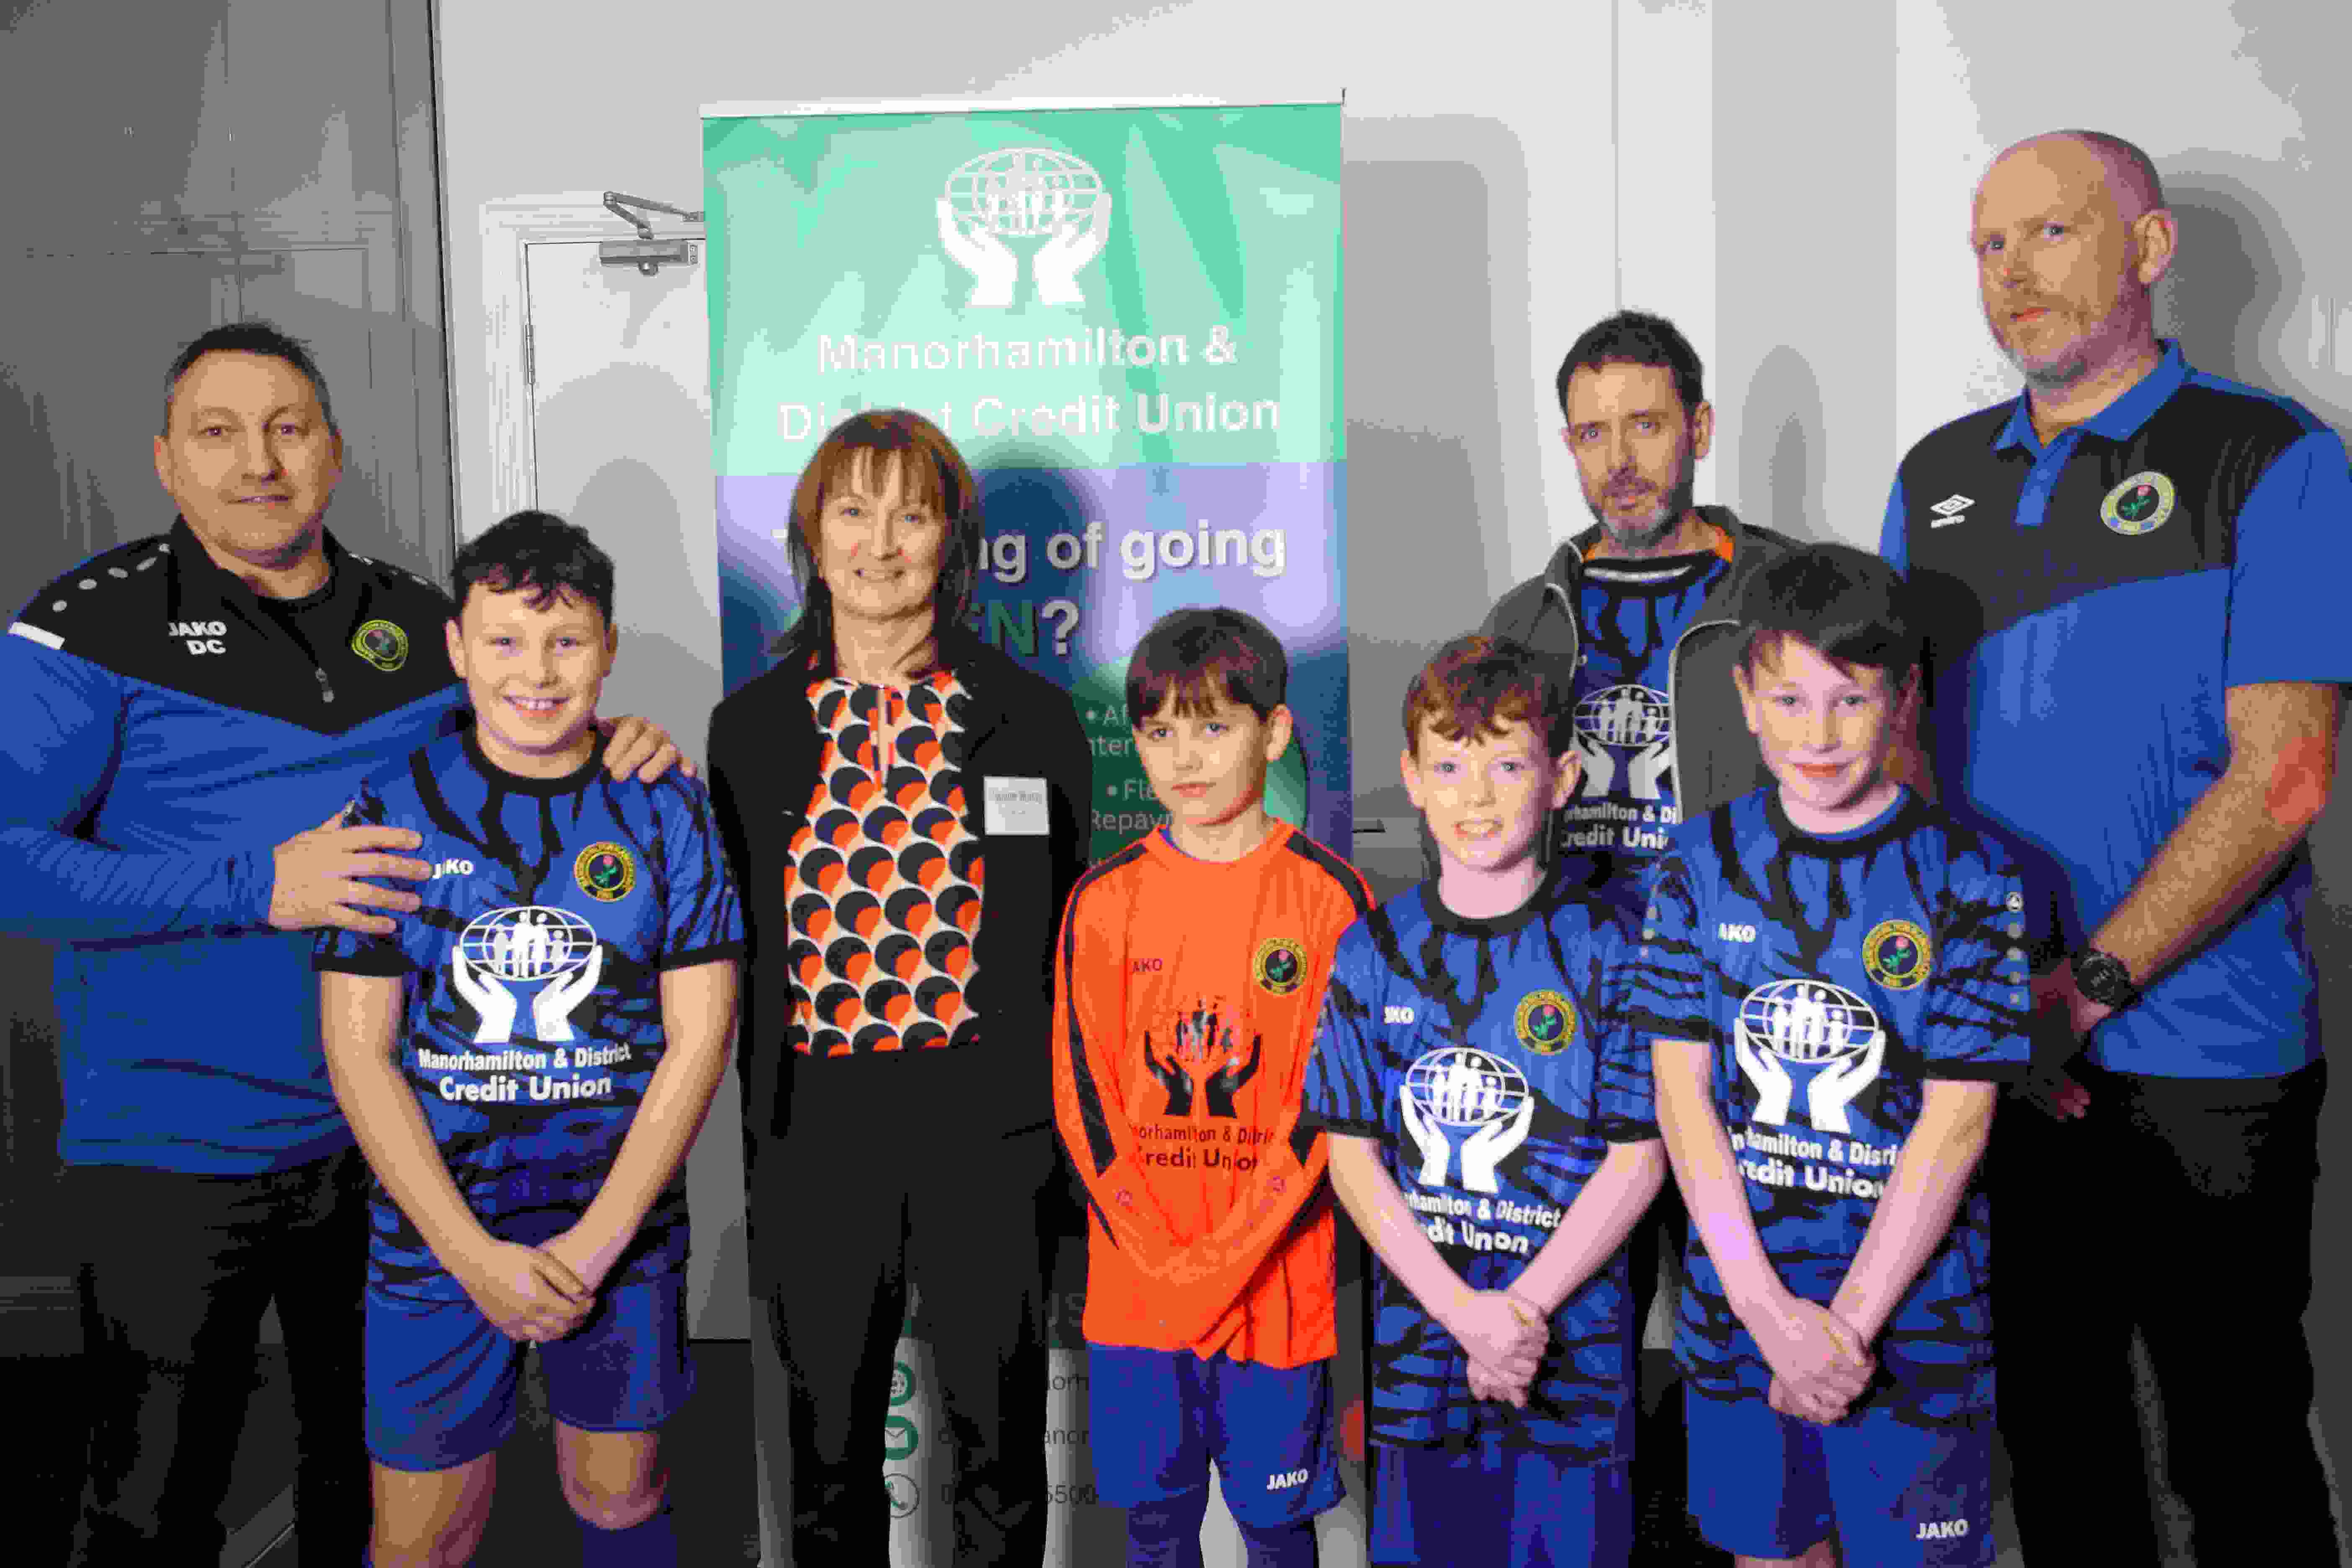 Left to Right: David Clancy (Manager of U11), Kyle Clancy, Pauline Murray (Manager of Credit Union), Ferdiad O’Reilly, Bríon Cullen, Keith O’Reilly (Manager of U11), Ben Spratt, Rob Spratt (Manager of U11).